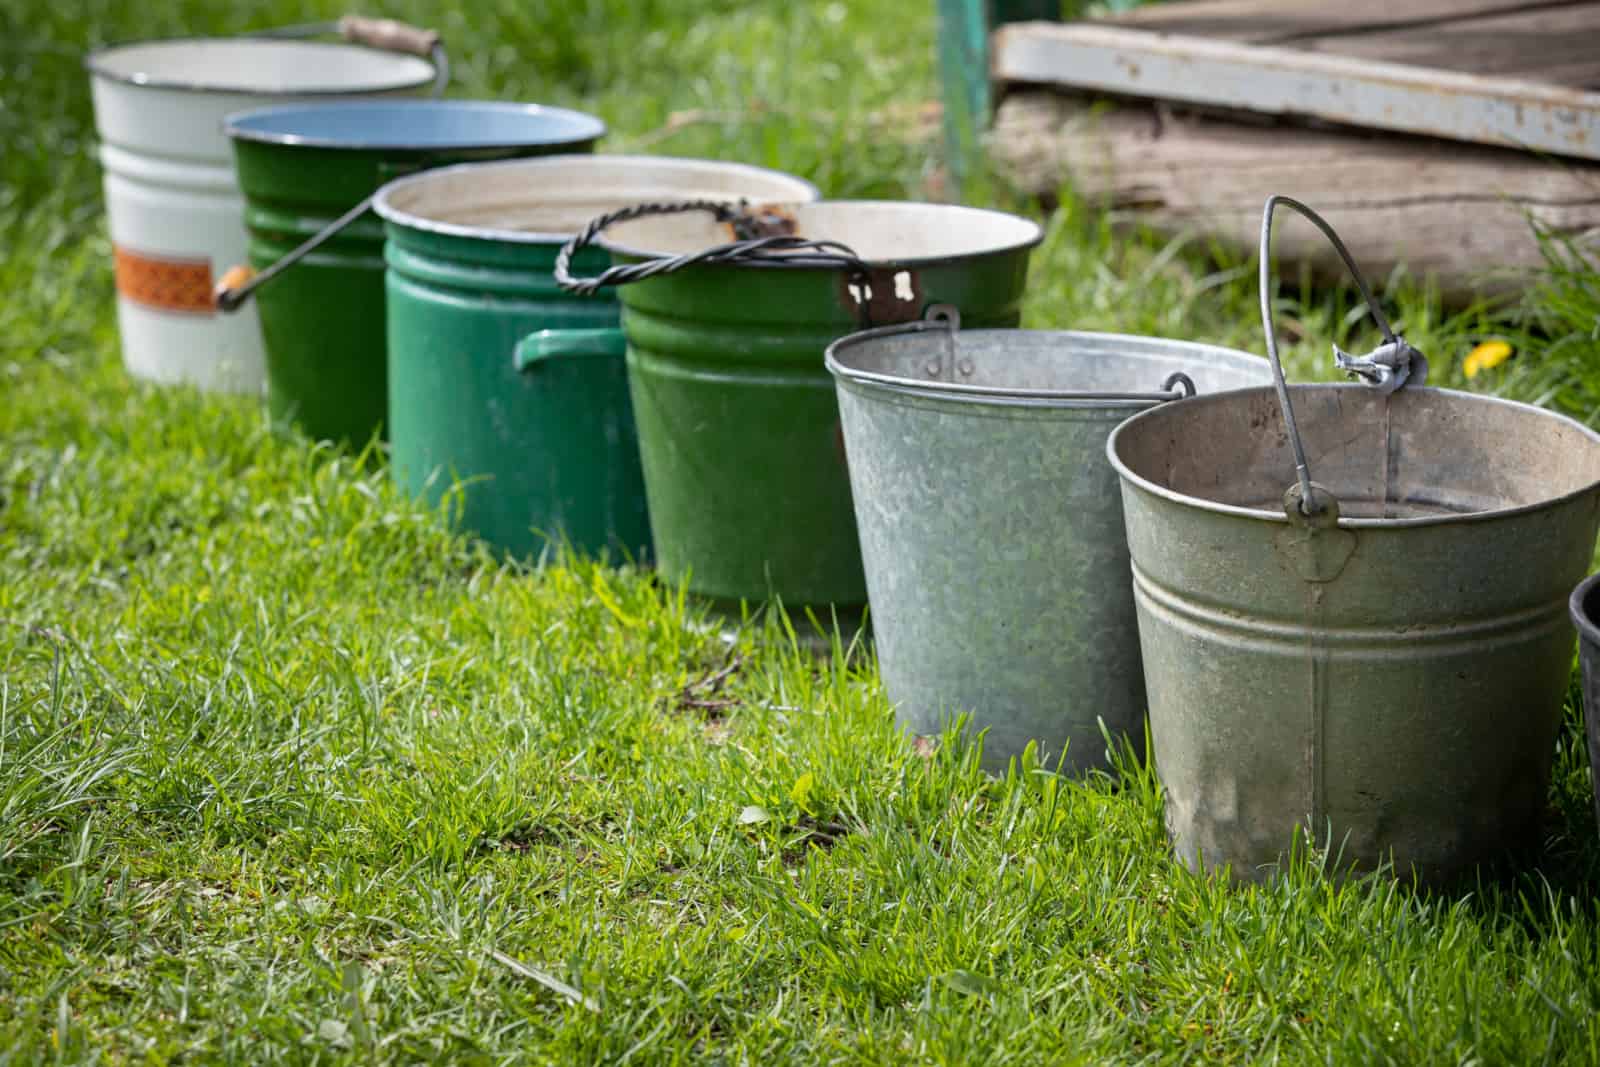 Several old buckets are standing on the grass in sunny weather